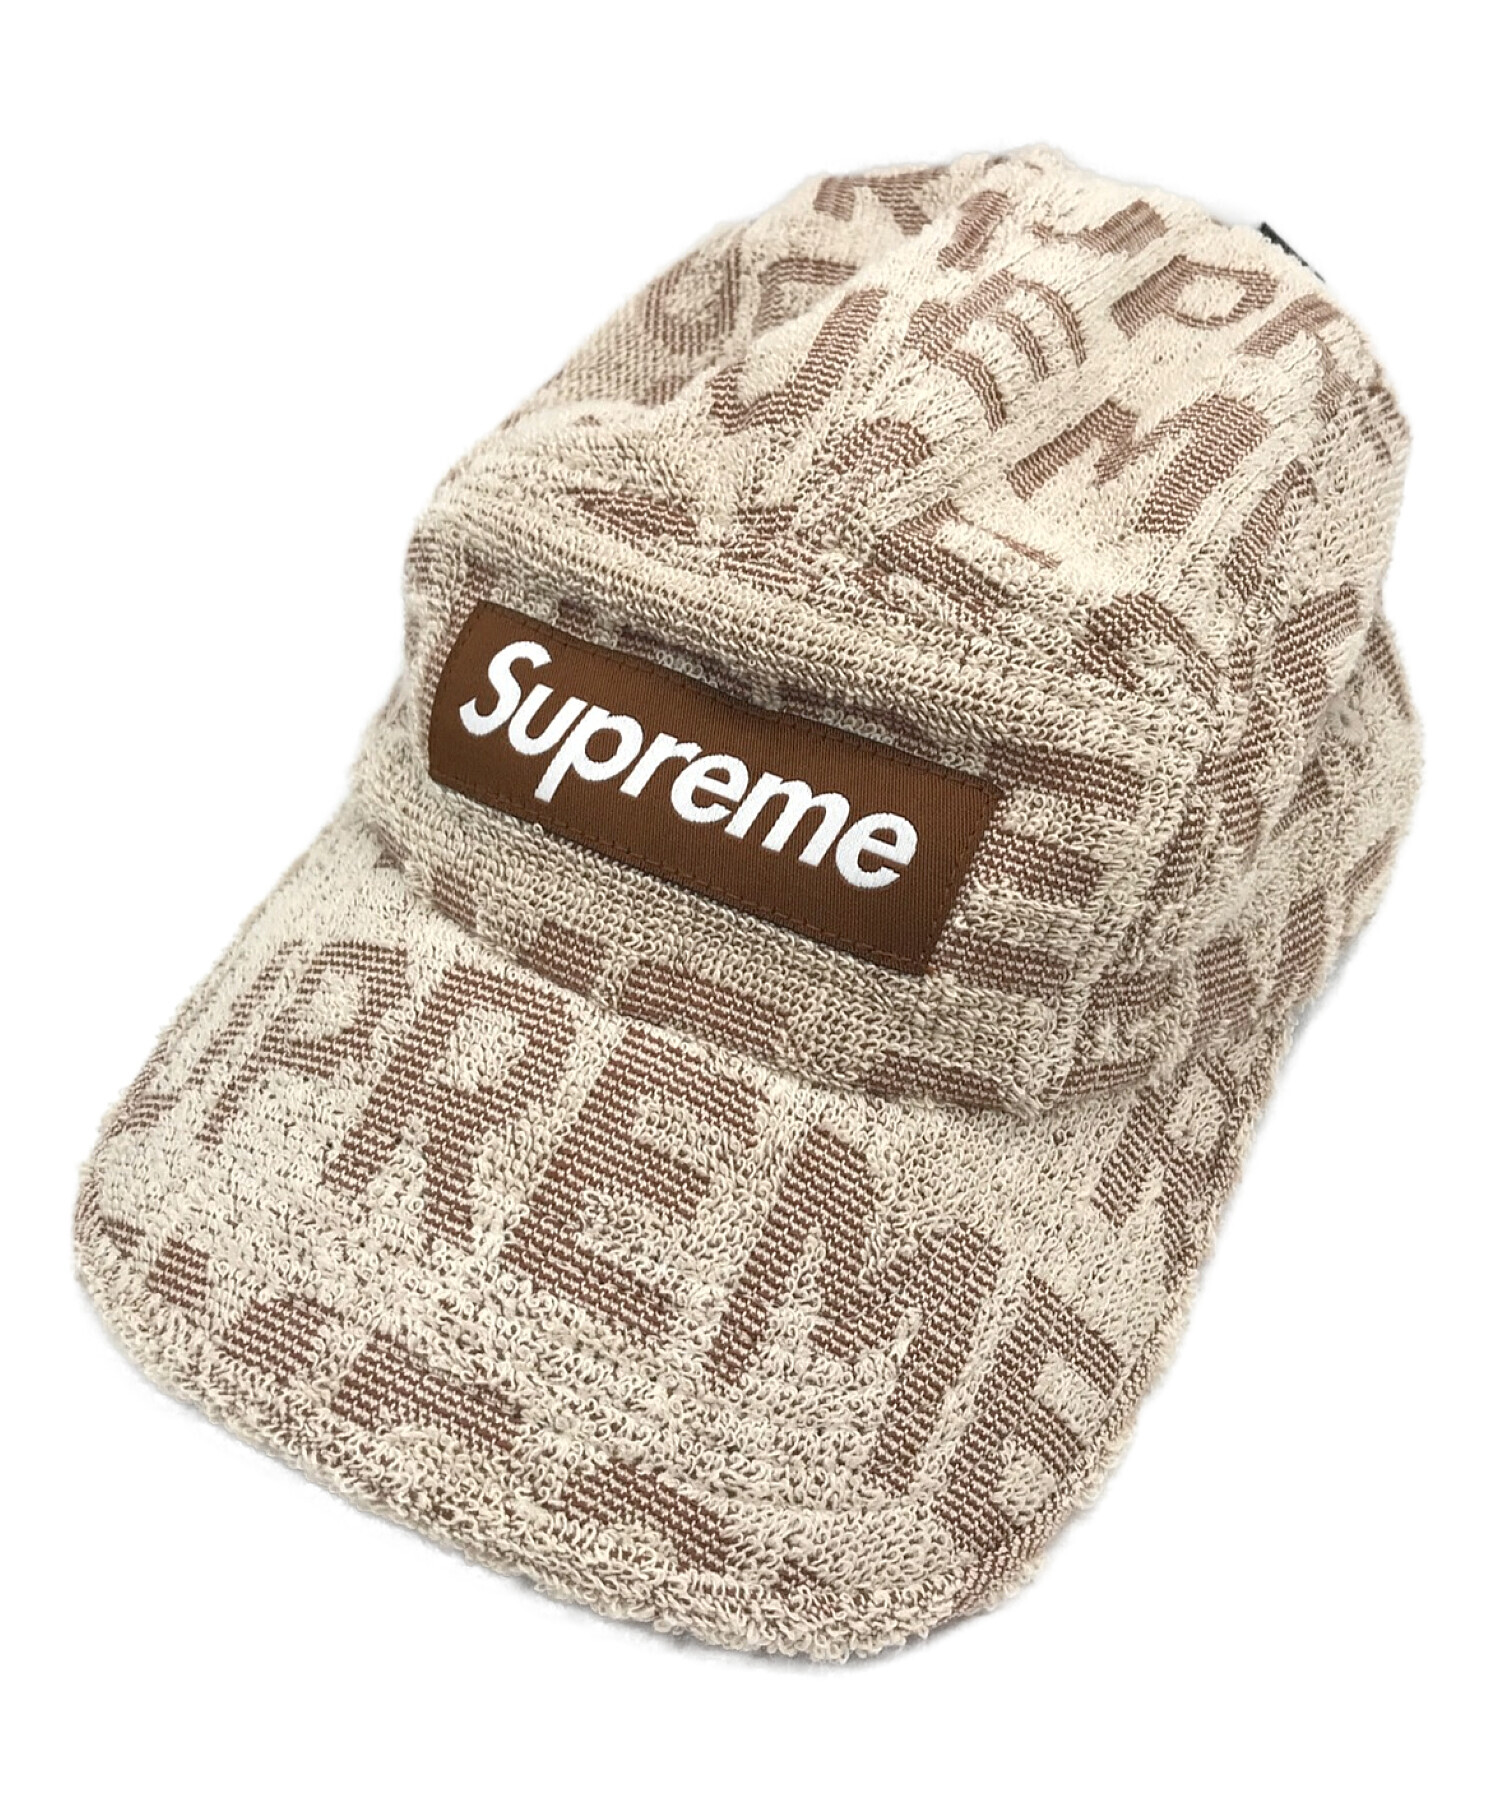 Supreme Terry Spellout Camp キャップ シュプリーム